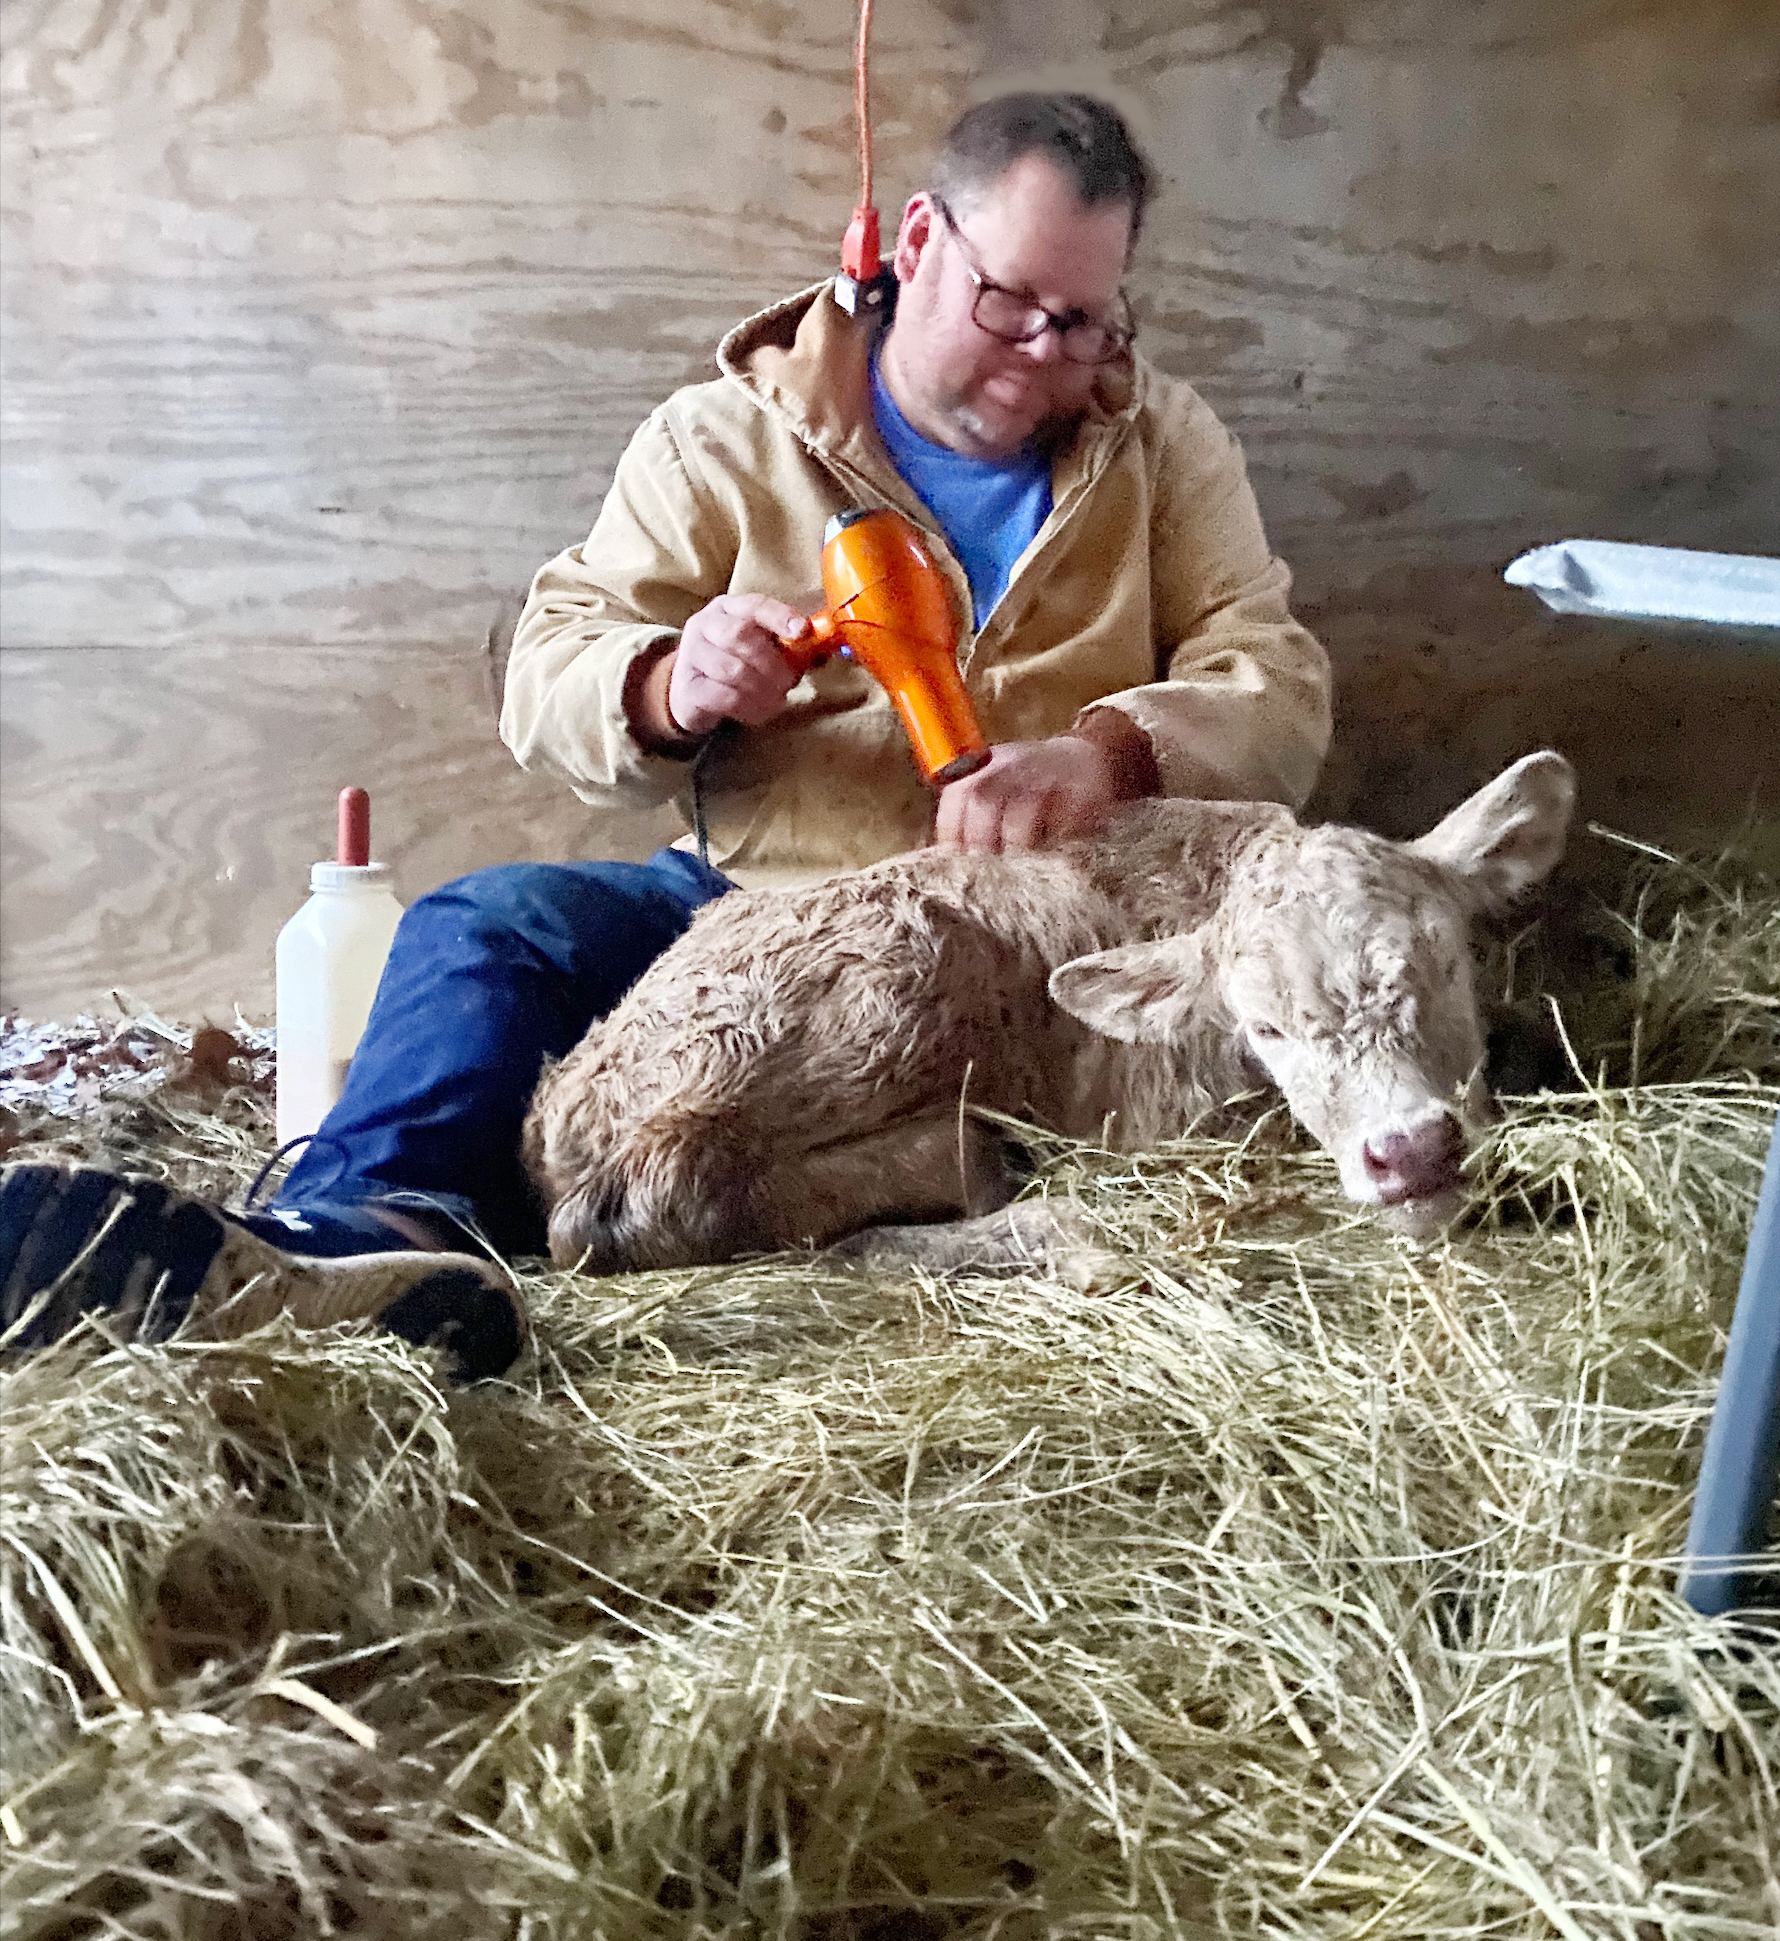 Terrell Davis using a hairdryer to warm a newborn calf, on a bed of hay in a barn.